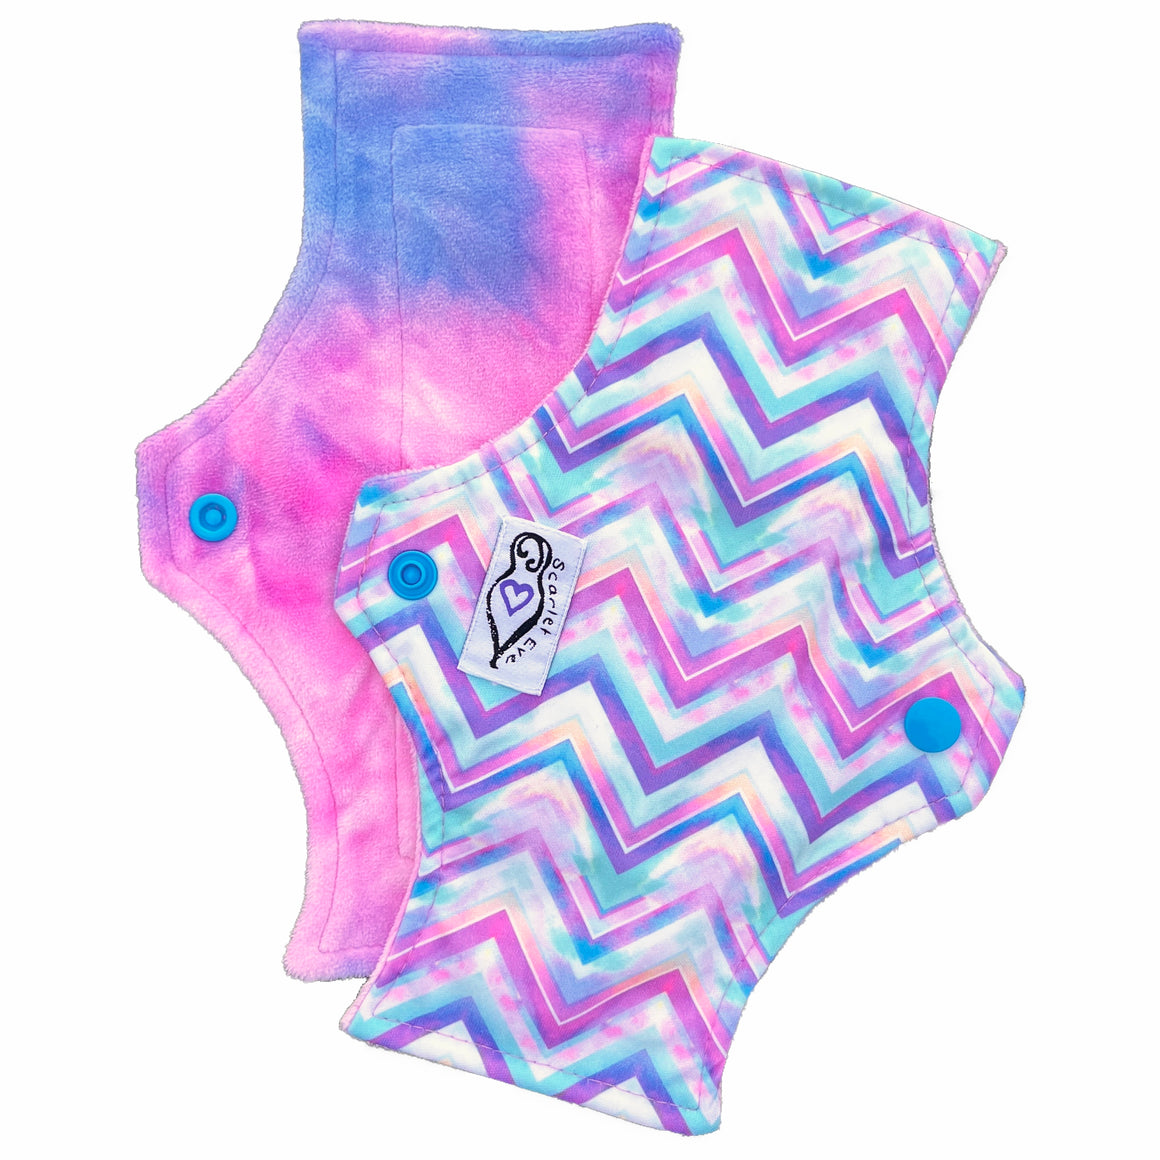 Scarlet Eve Pastel Chevron Mini Pad. Top: Plush Pink and Purple Minky. Bottom: Pastel Chevron PUL. 2 layer bamboo fleece booster sewn in. The original light-weight cloth pad from Scarlet Eve.